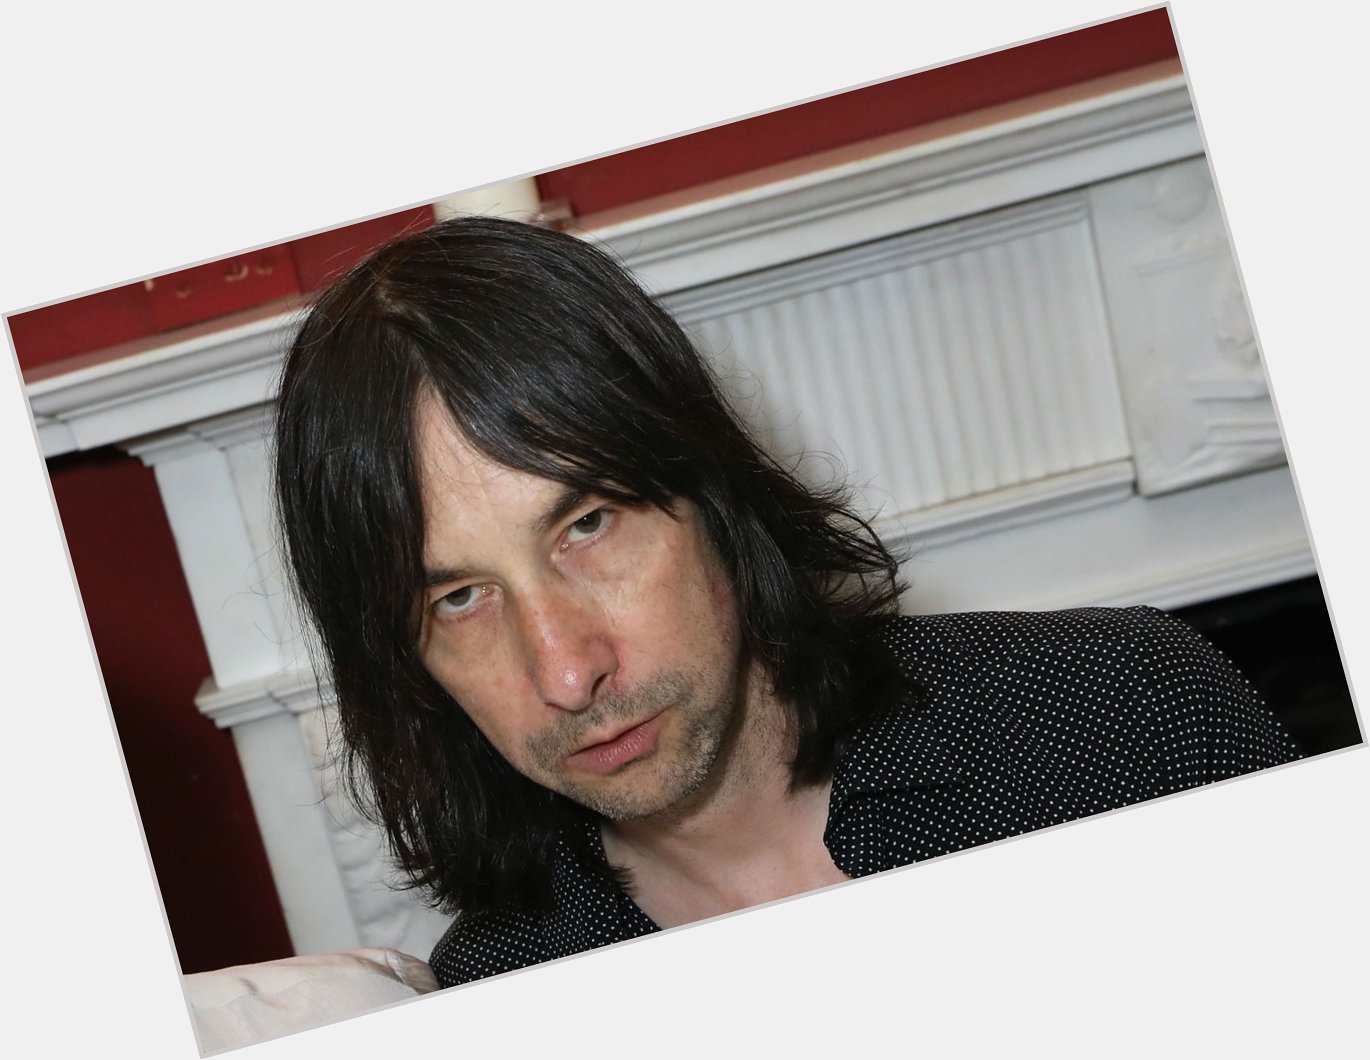 Please join us here at in wishing the one and only Bobby Gillespie a very Happy Birthday today  